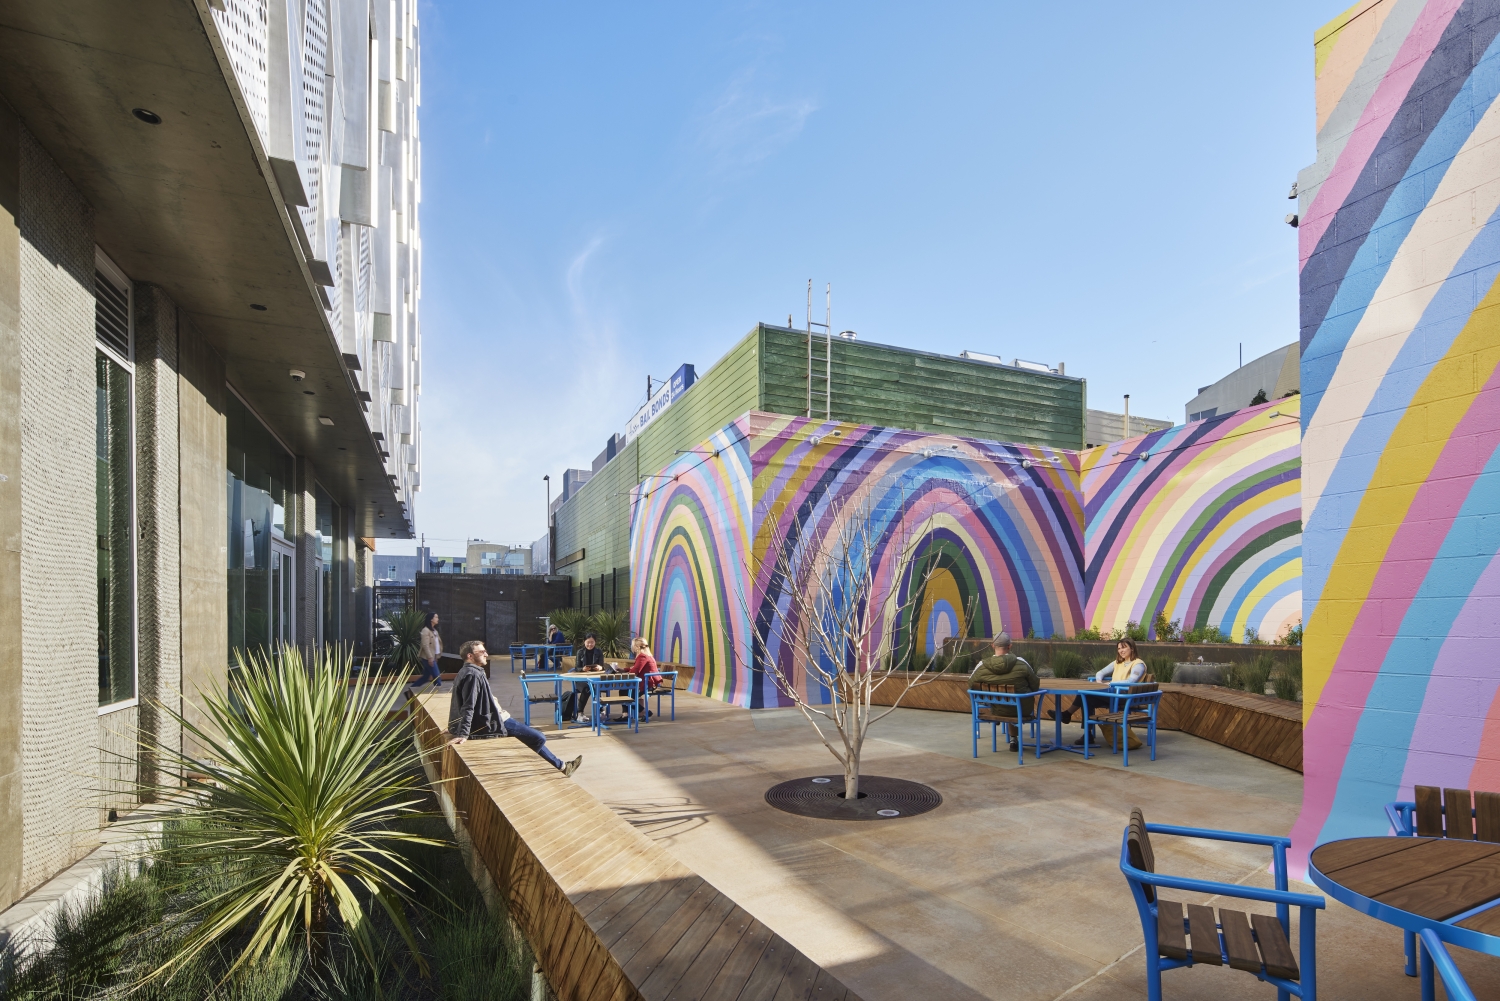 Sunny courtyard with seating, ringed by rainbow murals.